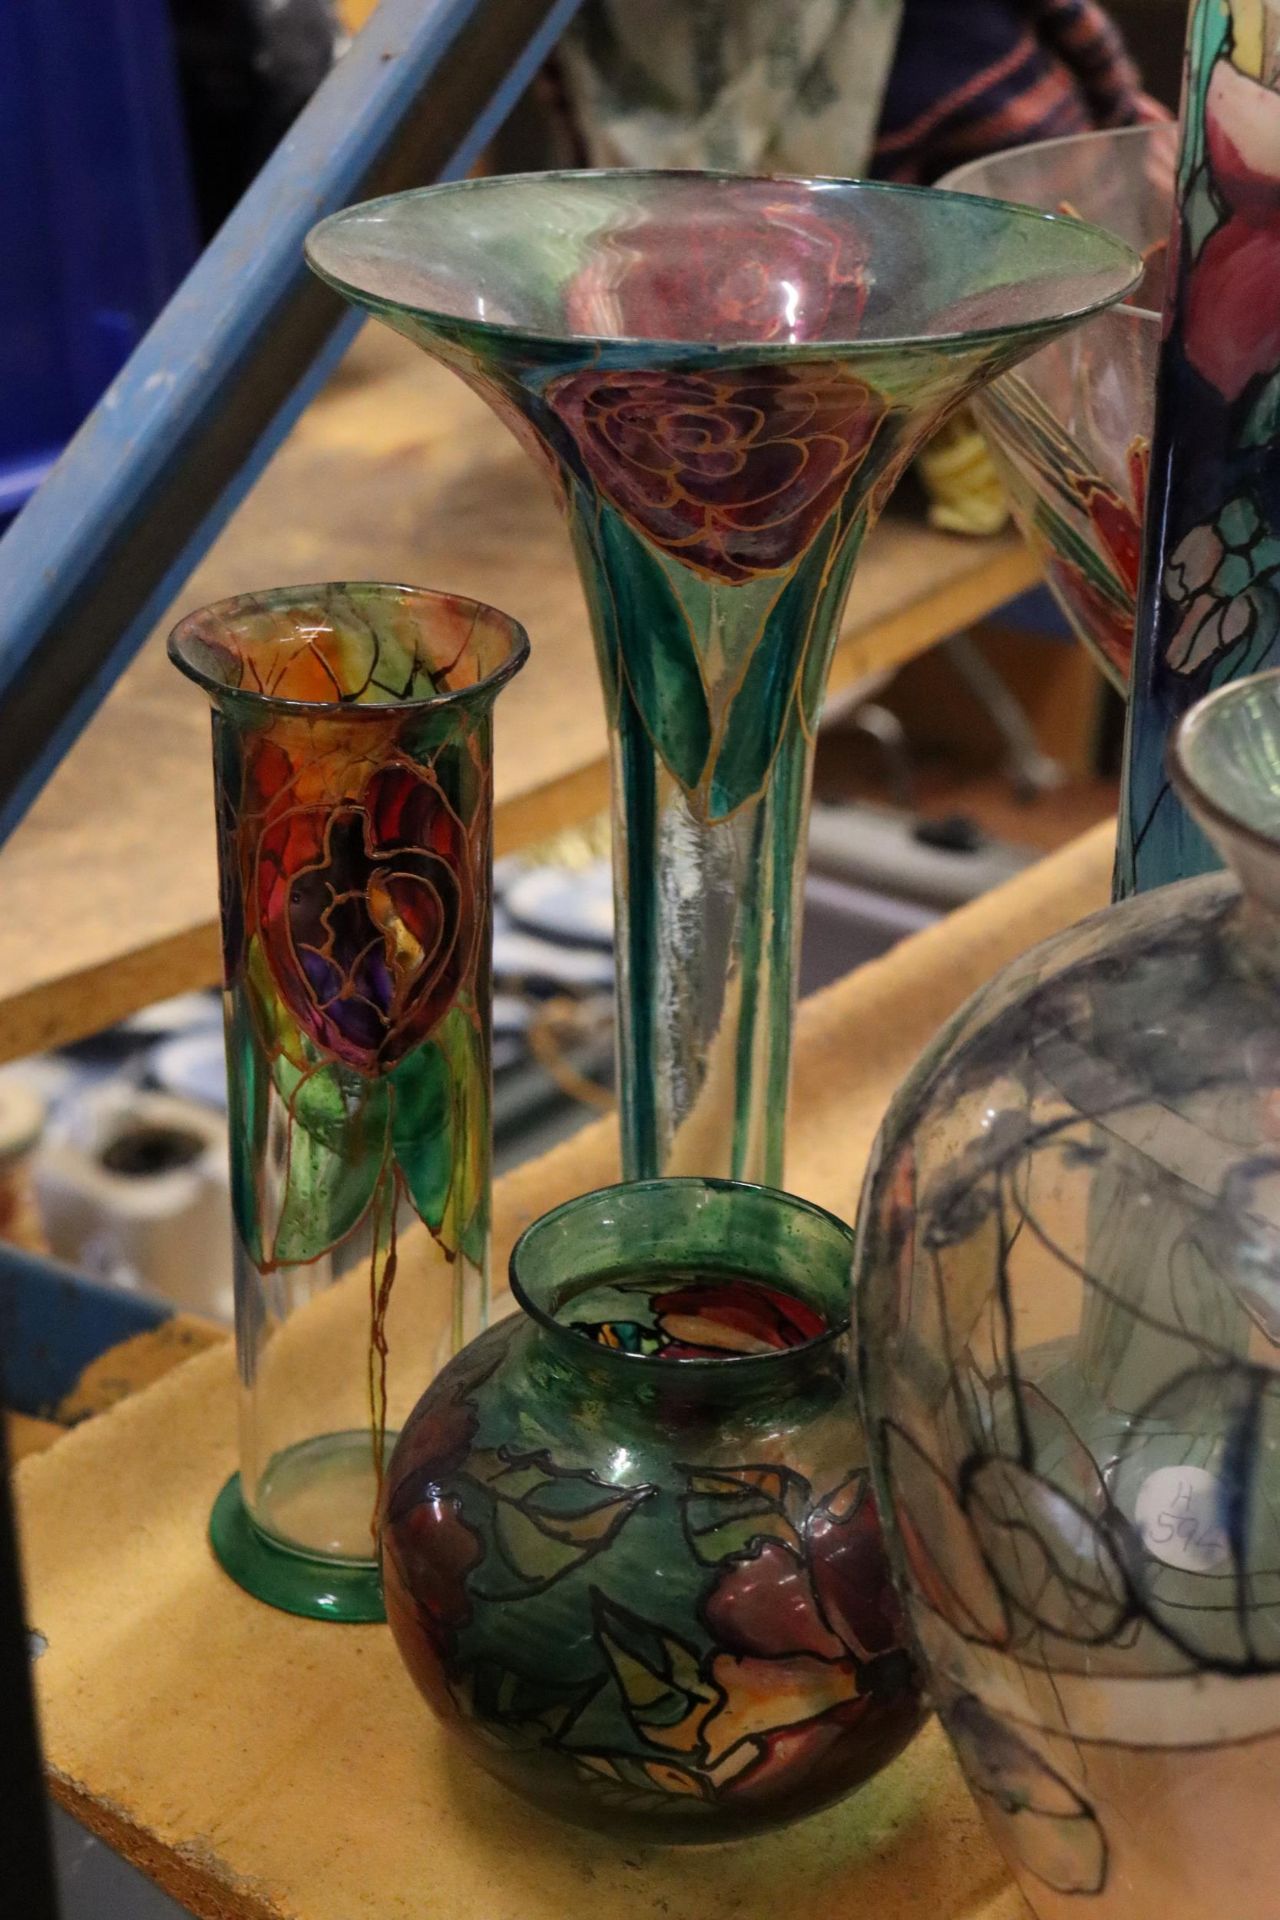 A LARGE MIXED LOT OF PAINTED ON GLASS VASES PLUS ONE DELCROFT WARE CERAMIC VASE - Image 2 of 11